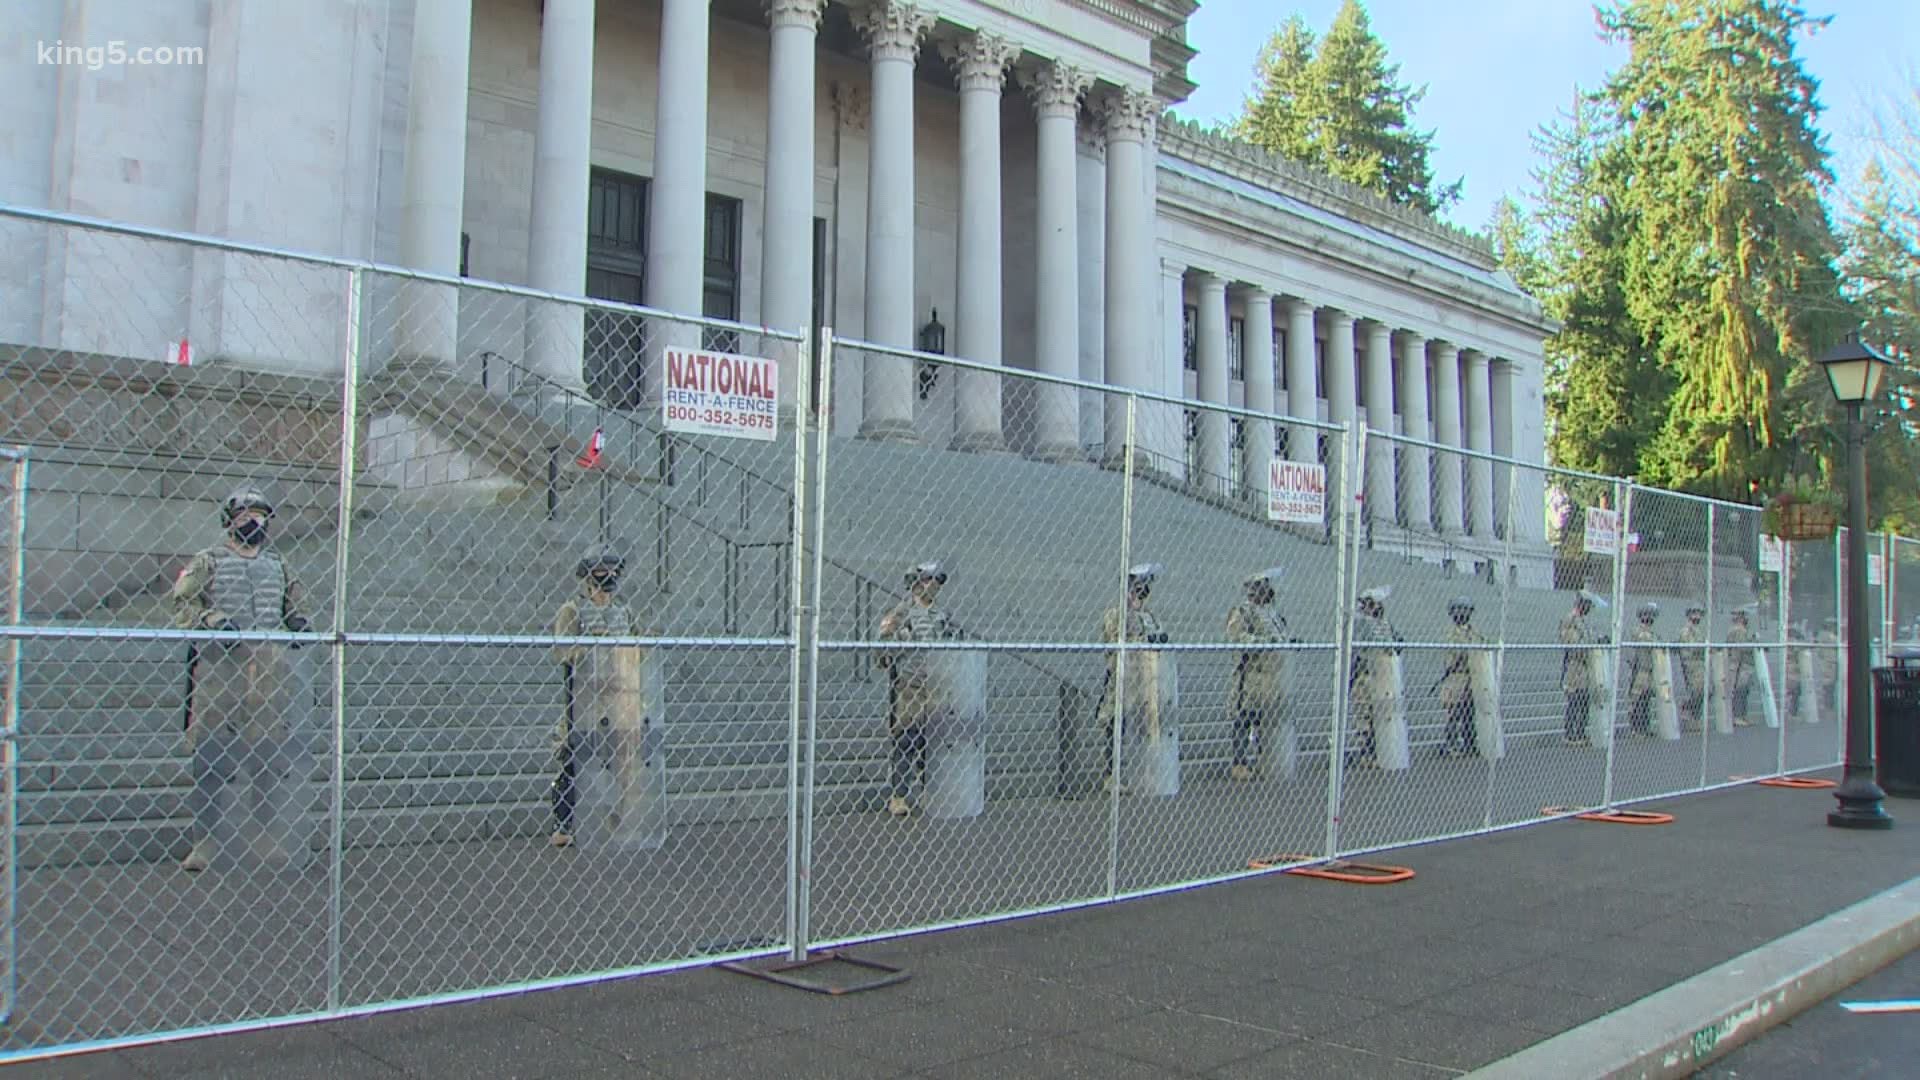 After chaos beset the U.S. Capitol, security has been beefed up around the state capitol in Olympia before the start of legislative sessions.